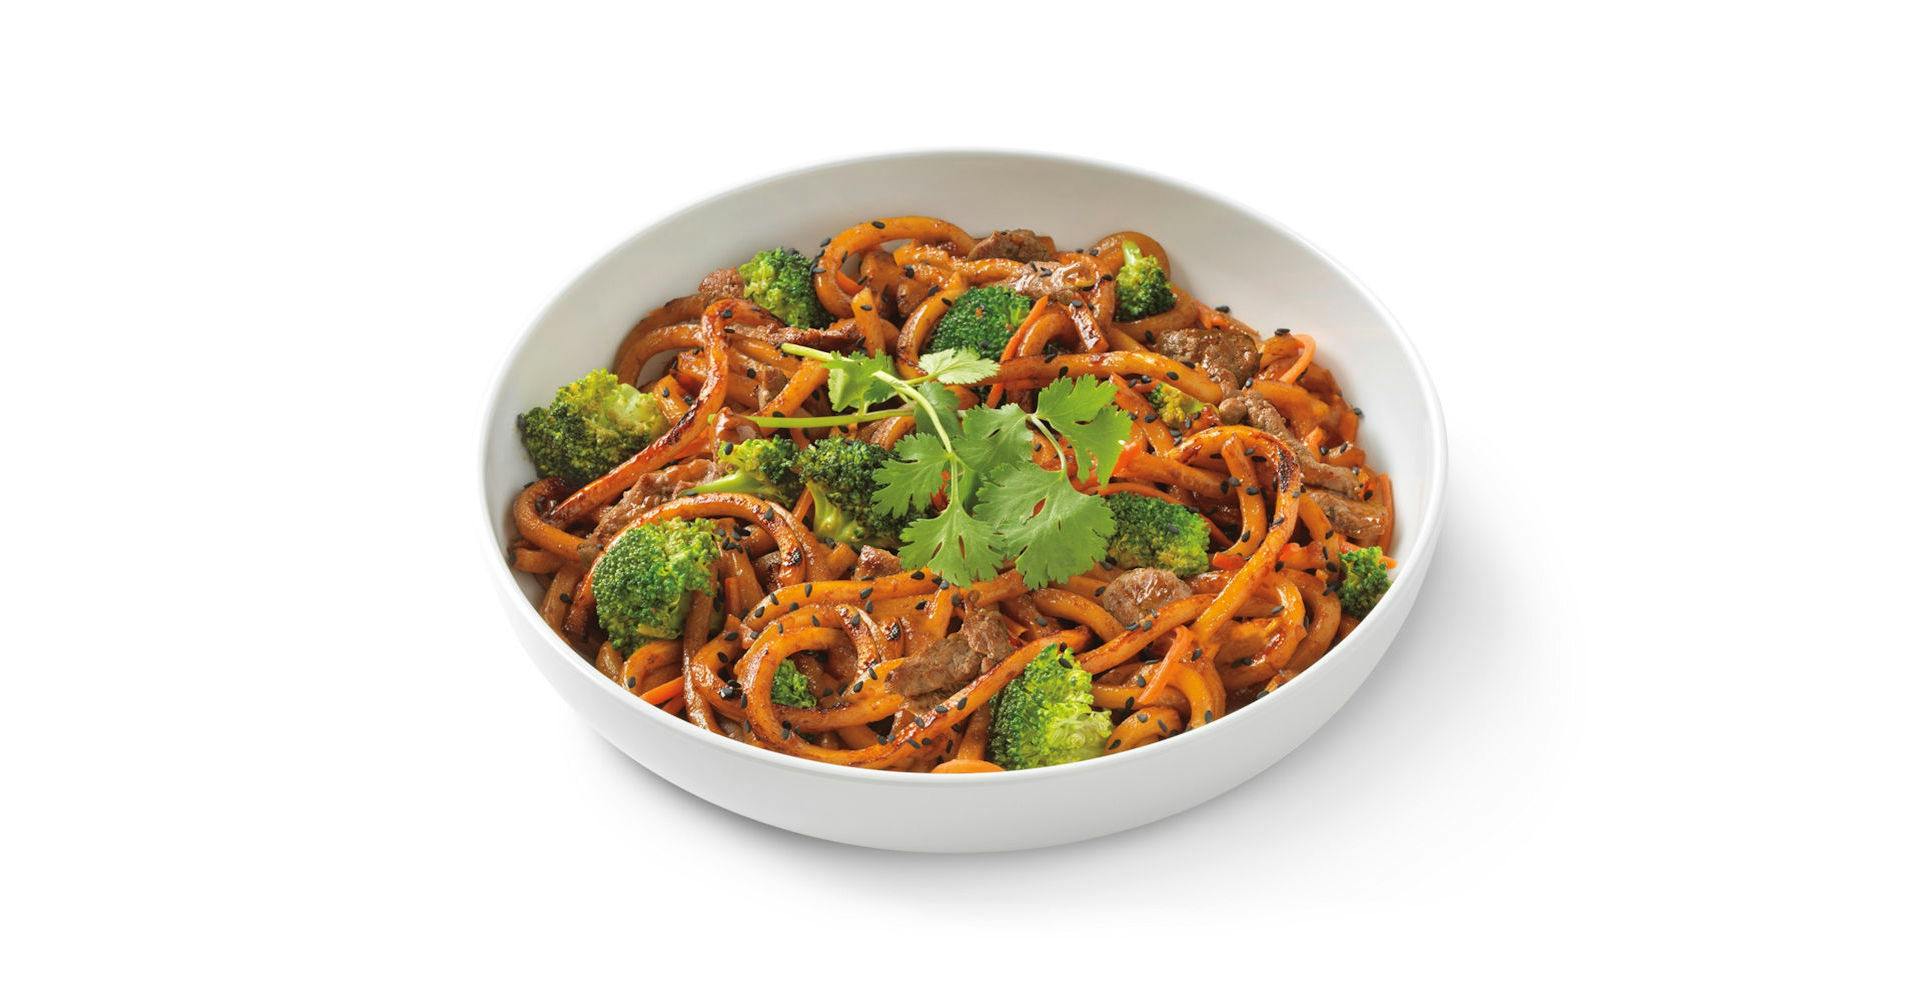 Japanese Pan Noodles with Marinated Steak from Noodles & Company - Manitowoc in Manitowoc, WI